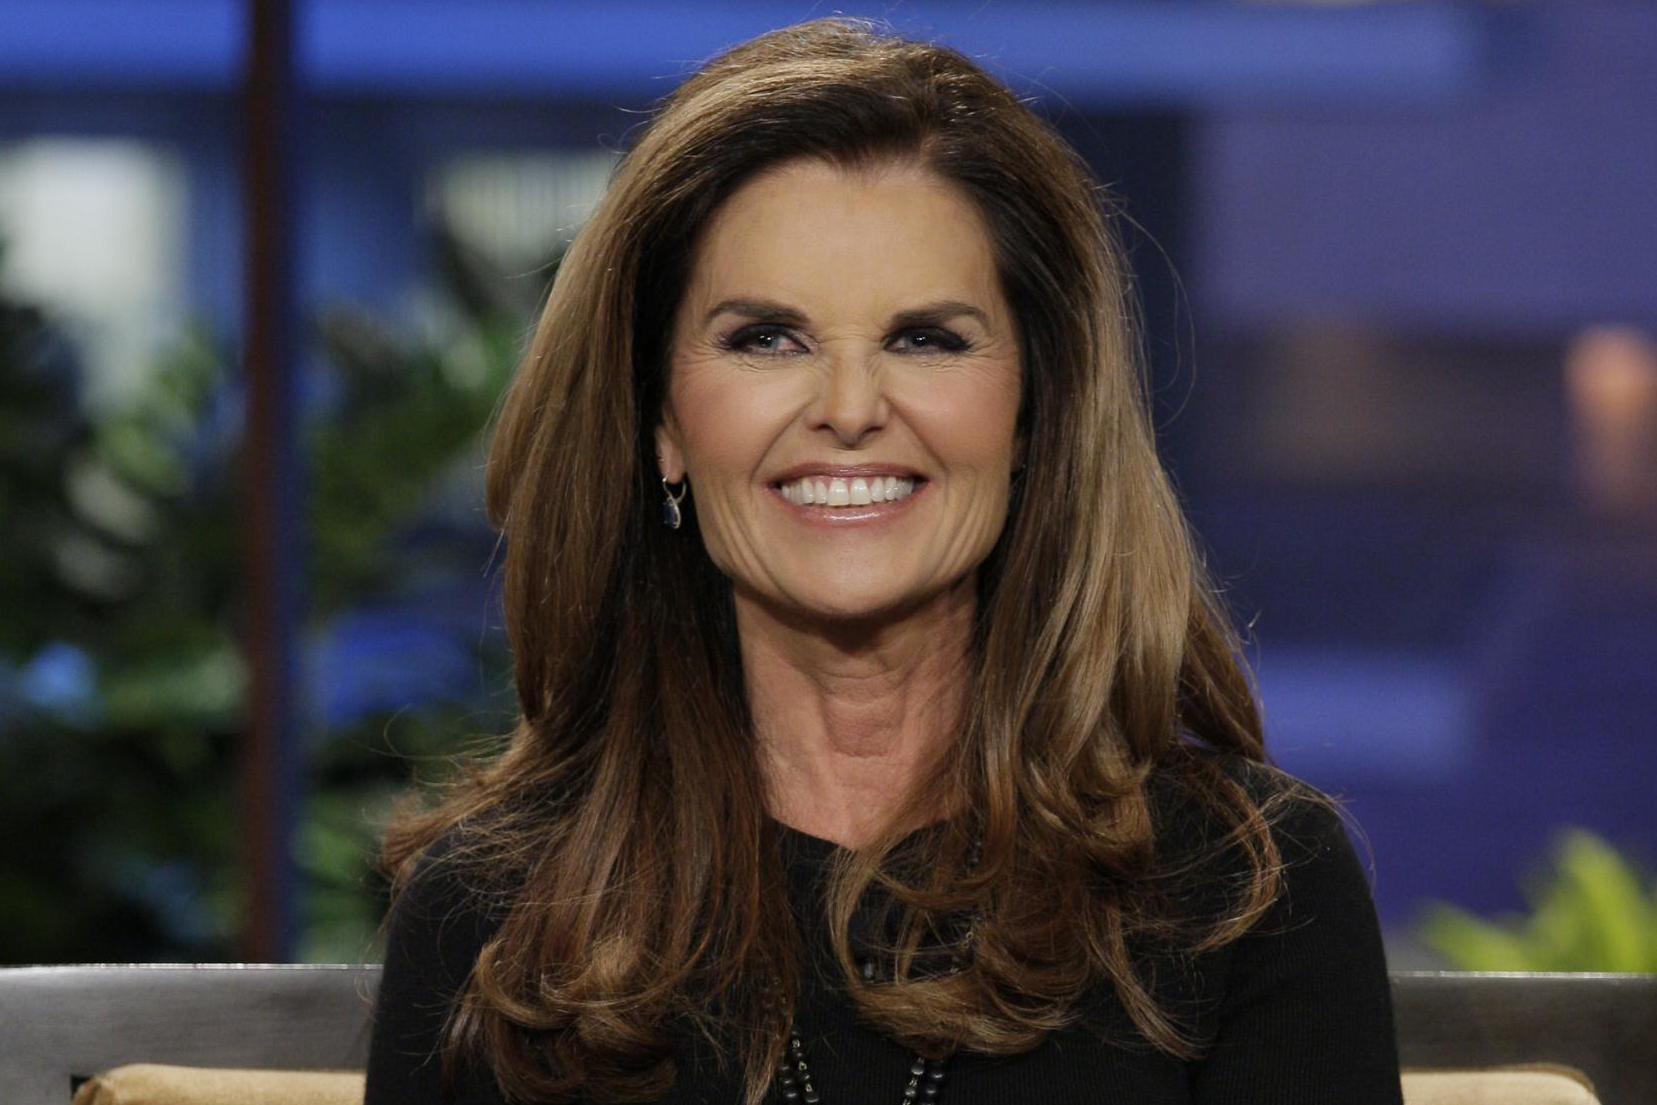 Journalist Maria Shriver during an interview on January 8, 2014